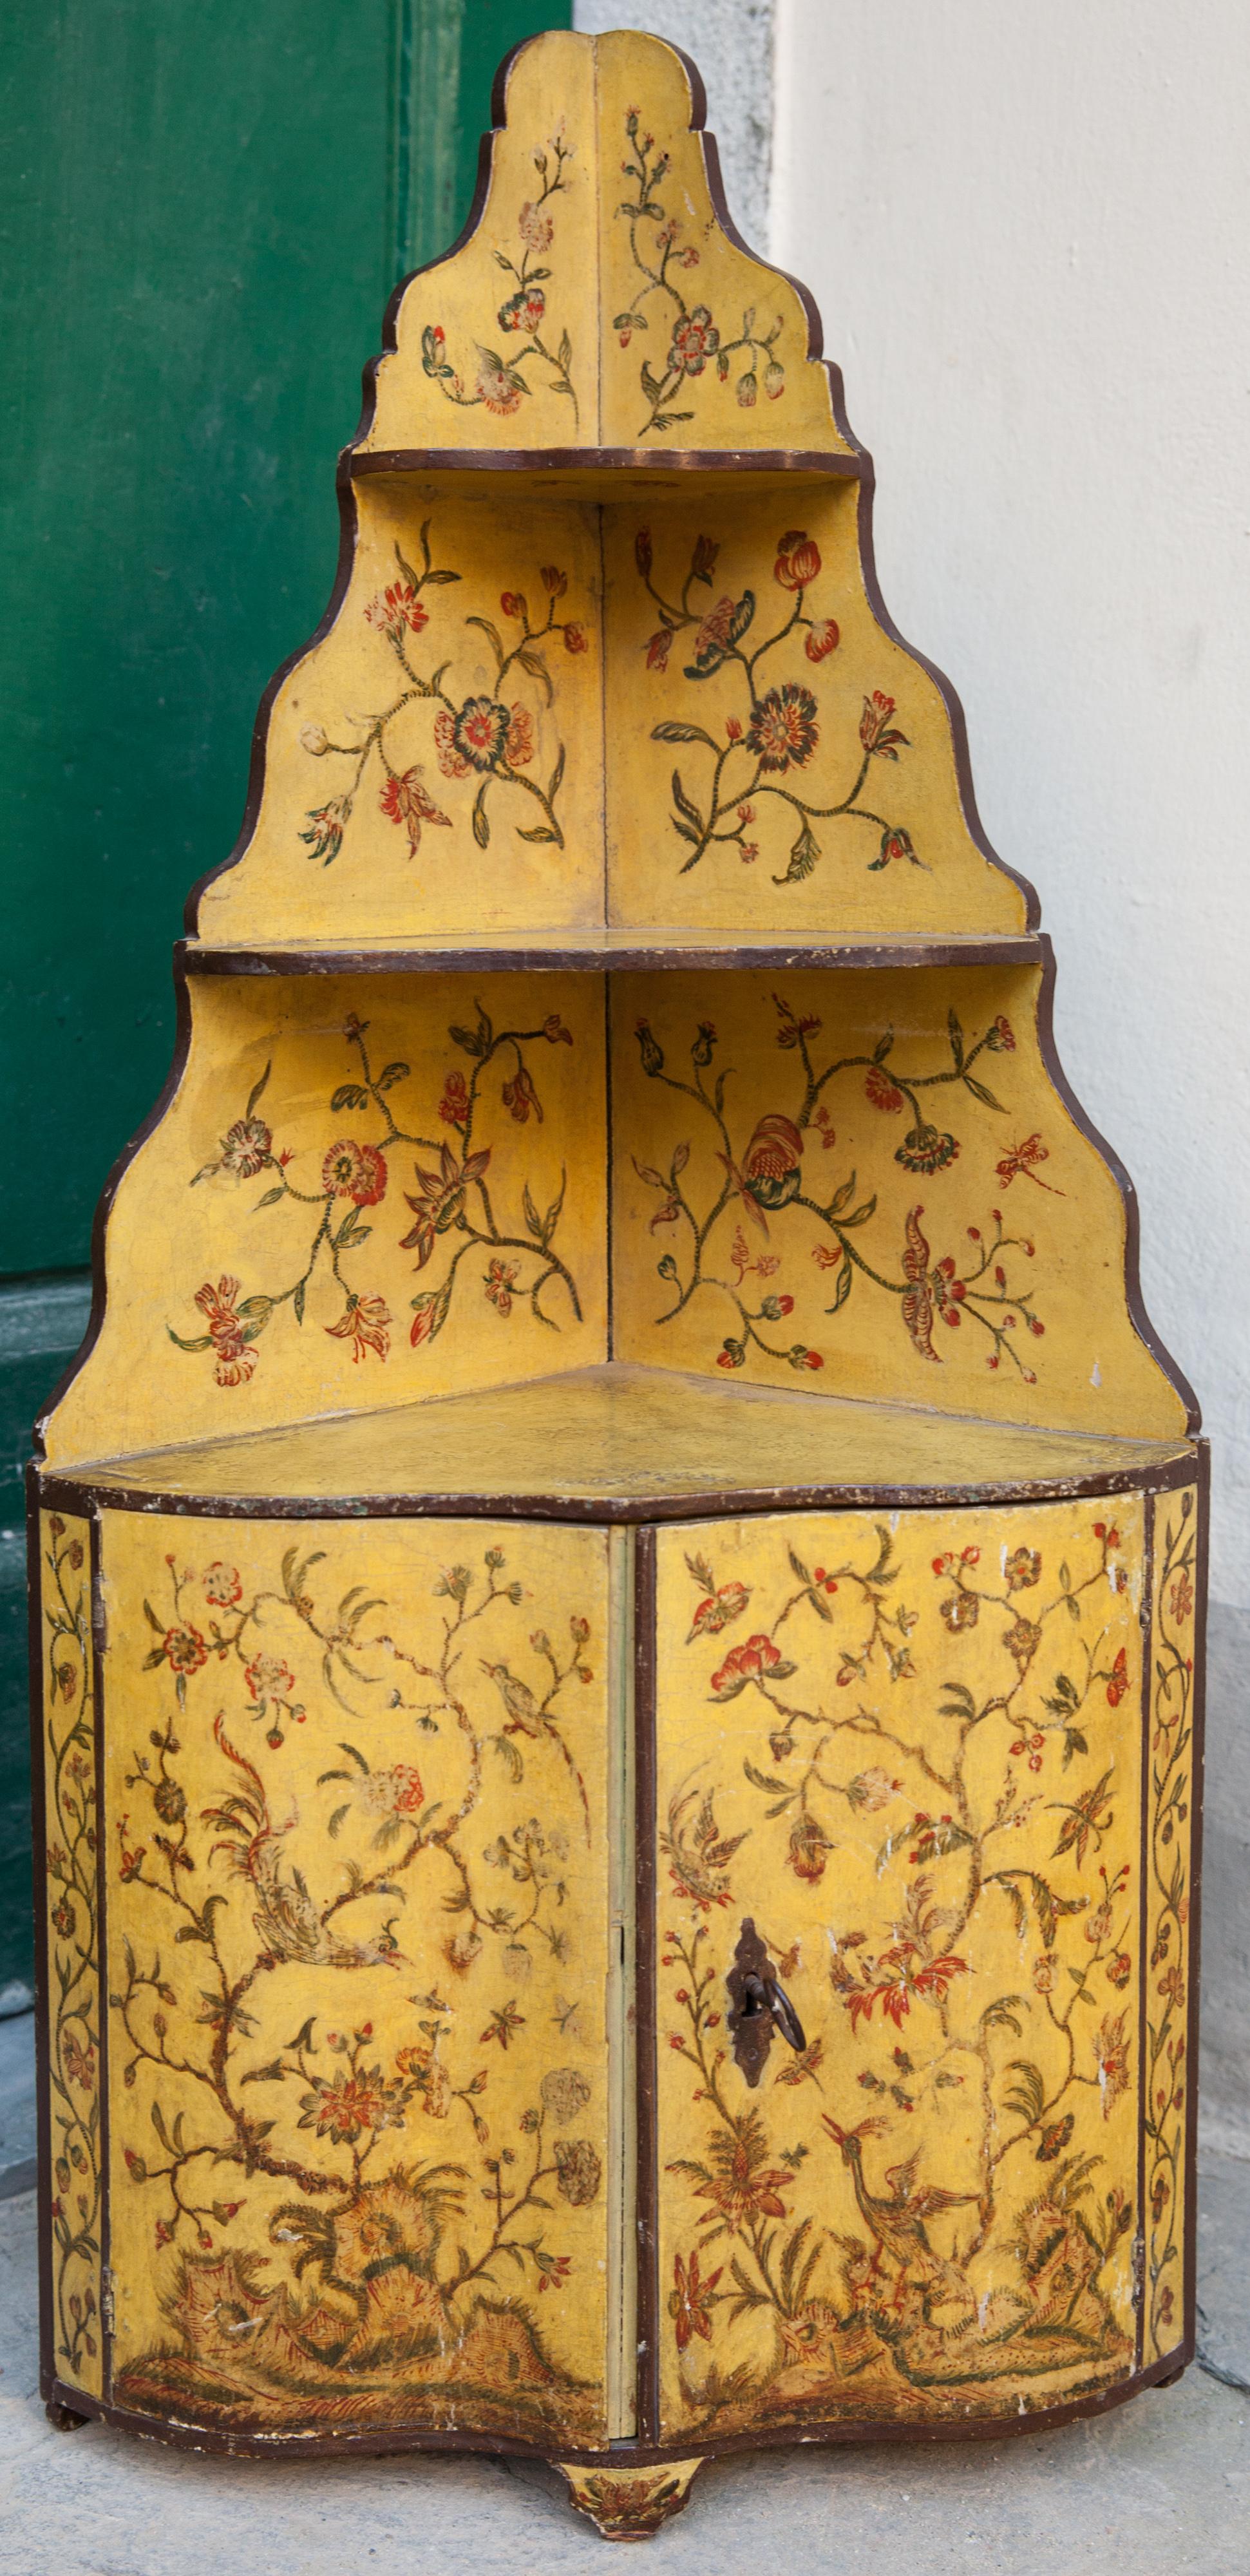 Mid 18th century Rococo Chinoiserie Corner capboard with Exotic Flowers and bir